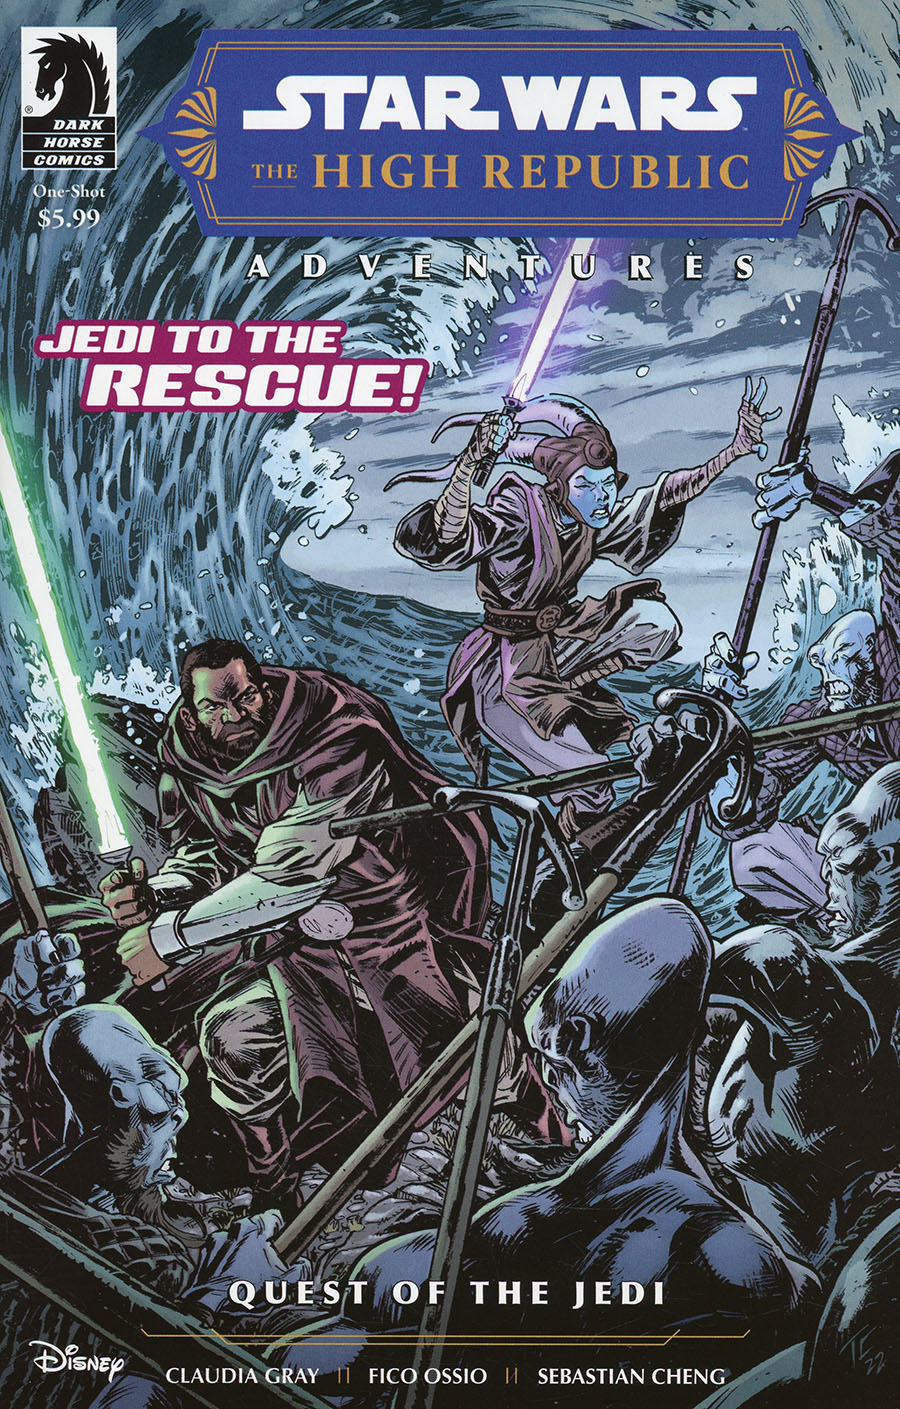 Star Wars The High Republic Adventures Quest Of The Jedi #1 (One Shot) Cover A Regular Tom Fowler Cover (Limit 1 Per Customer)